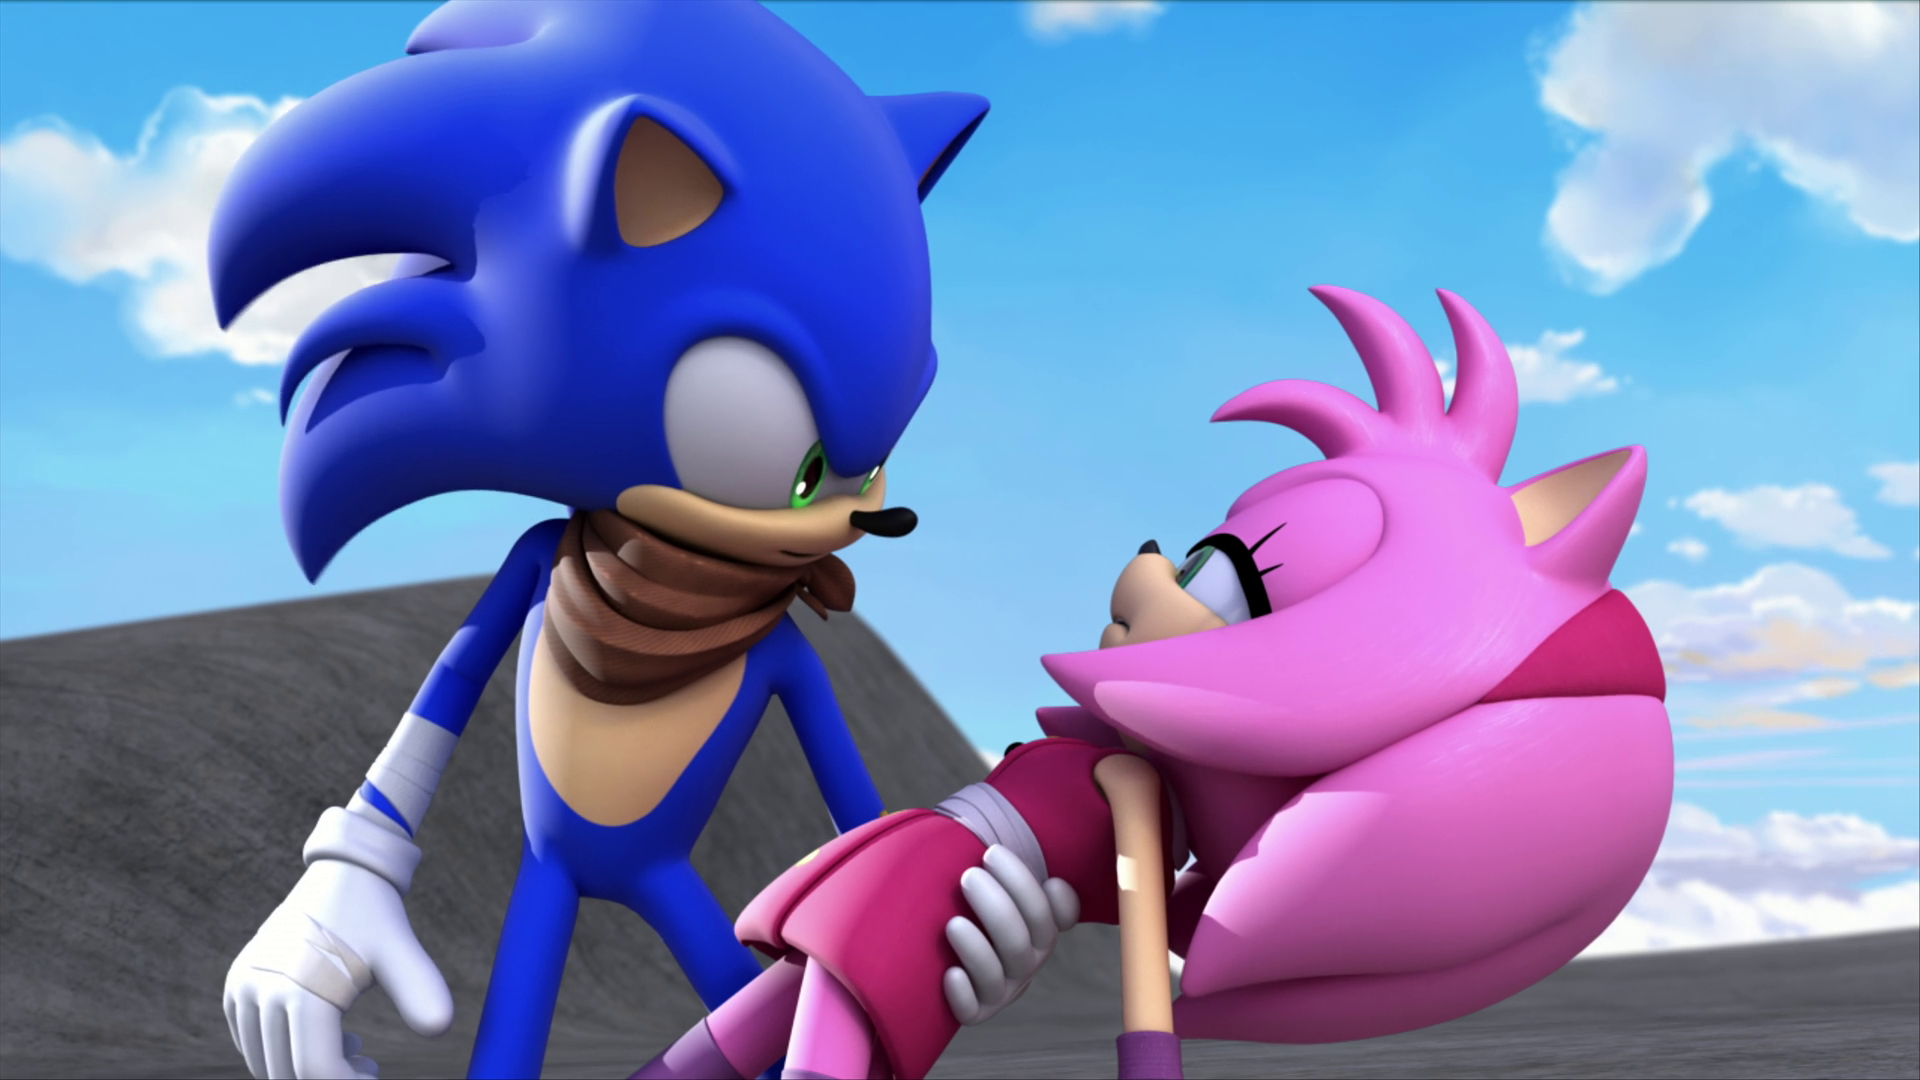 I created a SonAmy Boom AU where Sonic loses his leg in an accident, but  Amy is the only one certified to care for Sonic until he is healed!  👀🩷💙And Sonic has